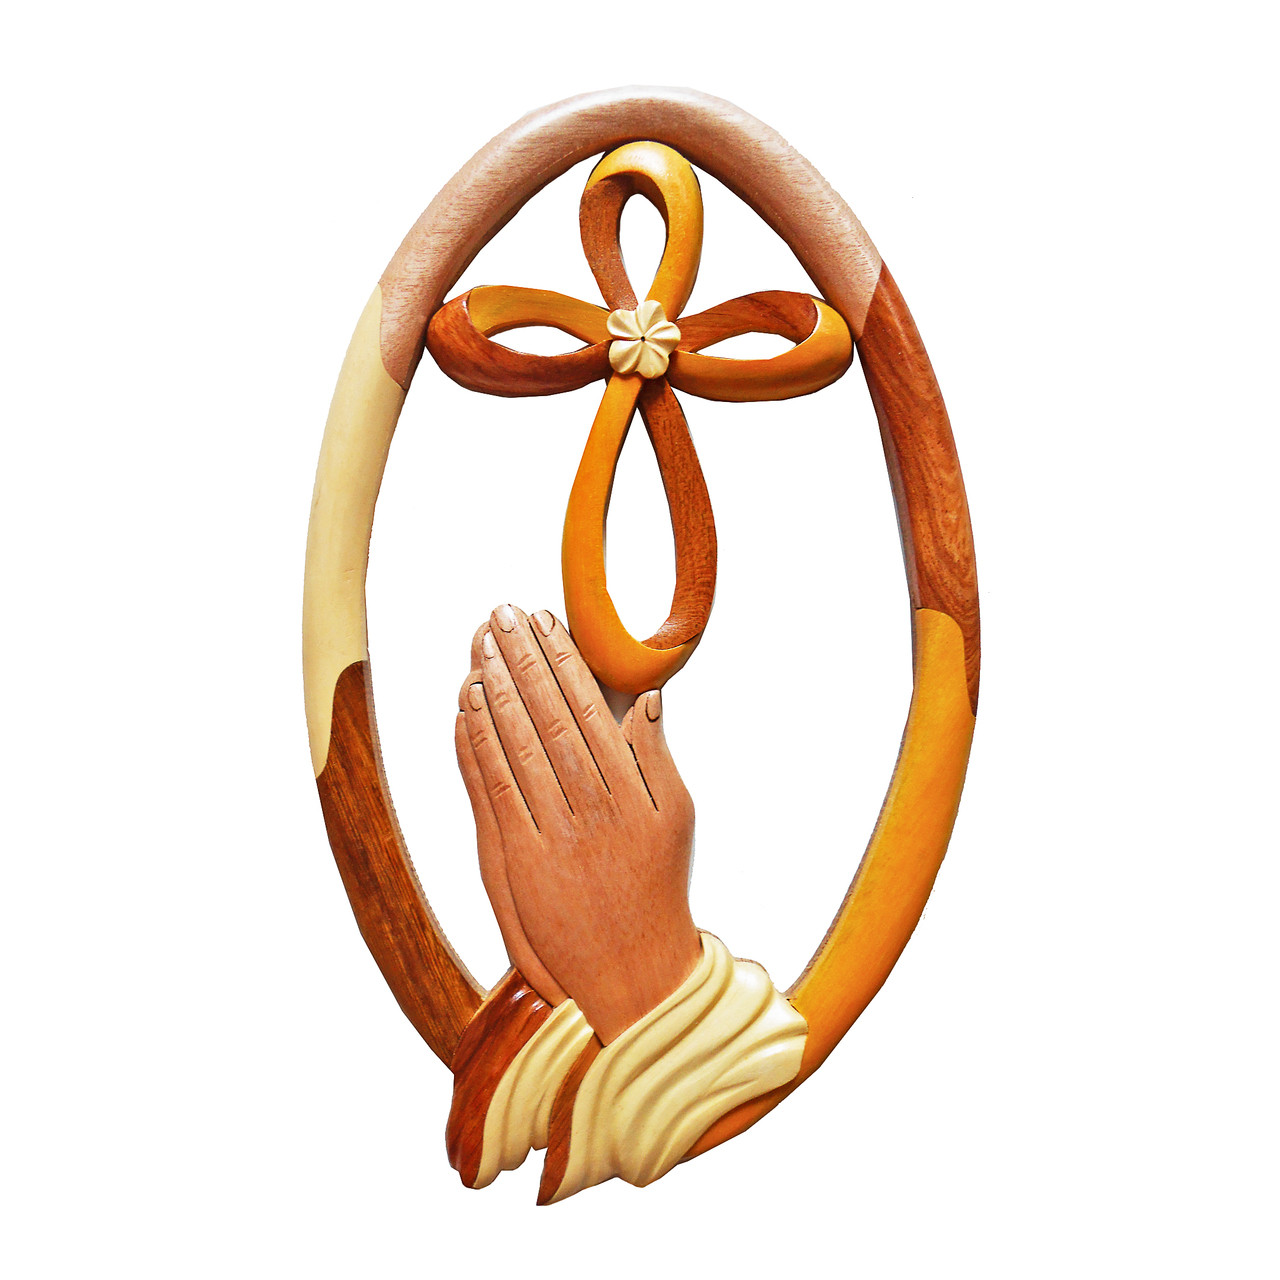 praying hands and cross images